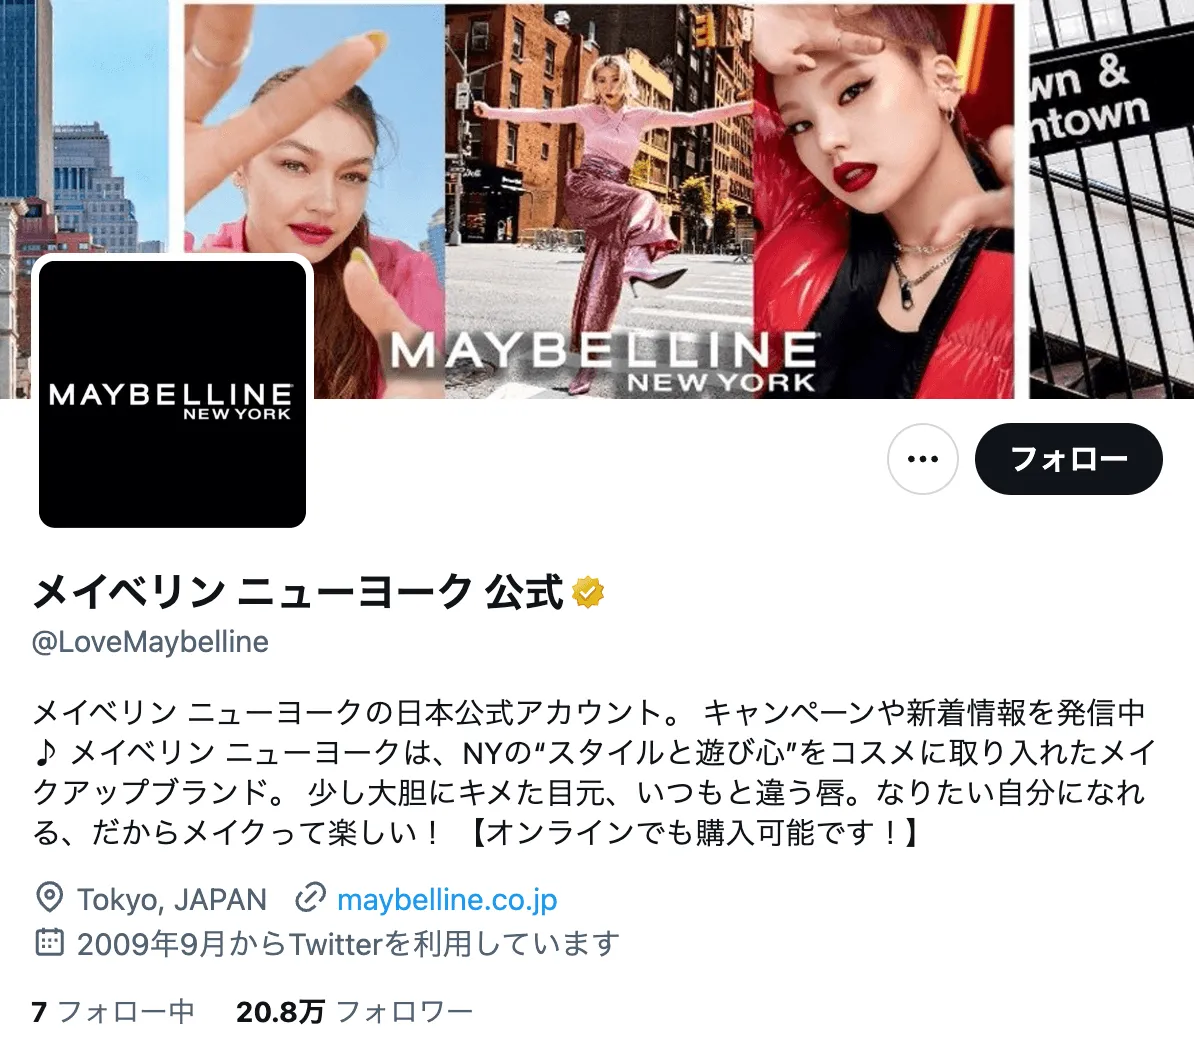 x-maybelline